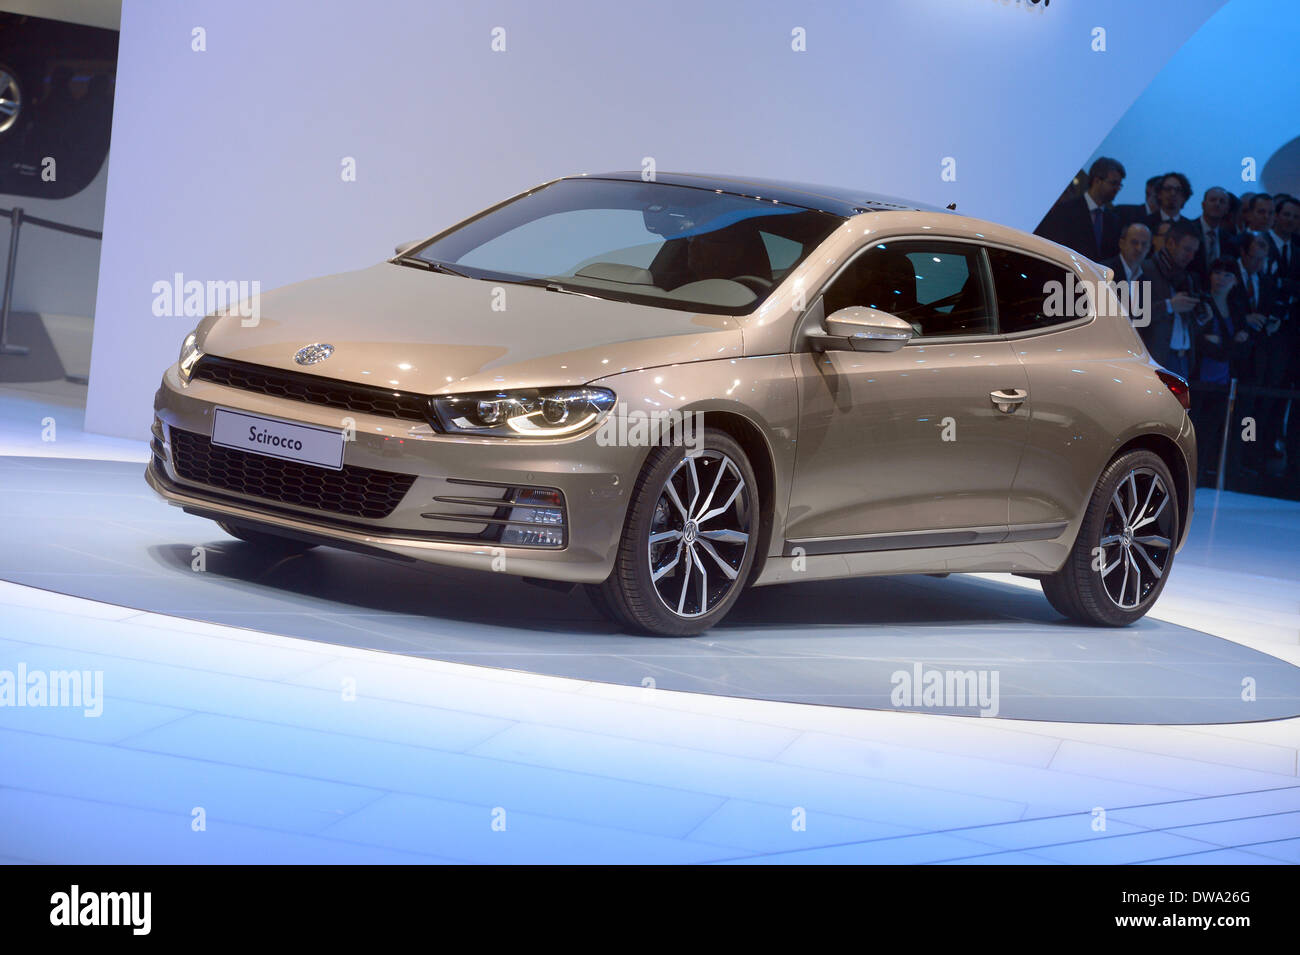 Geneva, Switzerland. 04th Mar, 2014. The VW Scirocco is presented at the  Palexpo exhibition hall during the first press day of the Geneva Motor Show  in Geneva, Switzerland, 04 March 2014. The